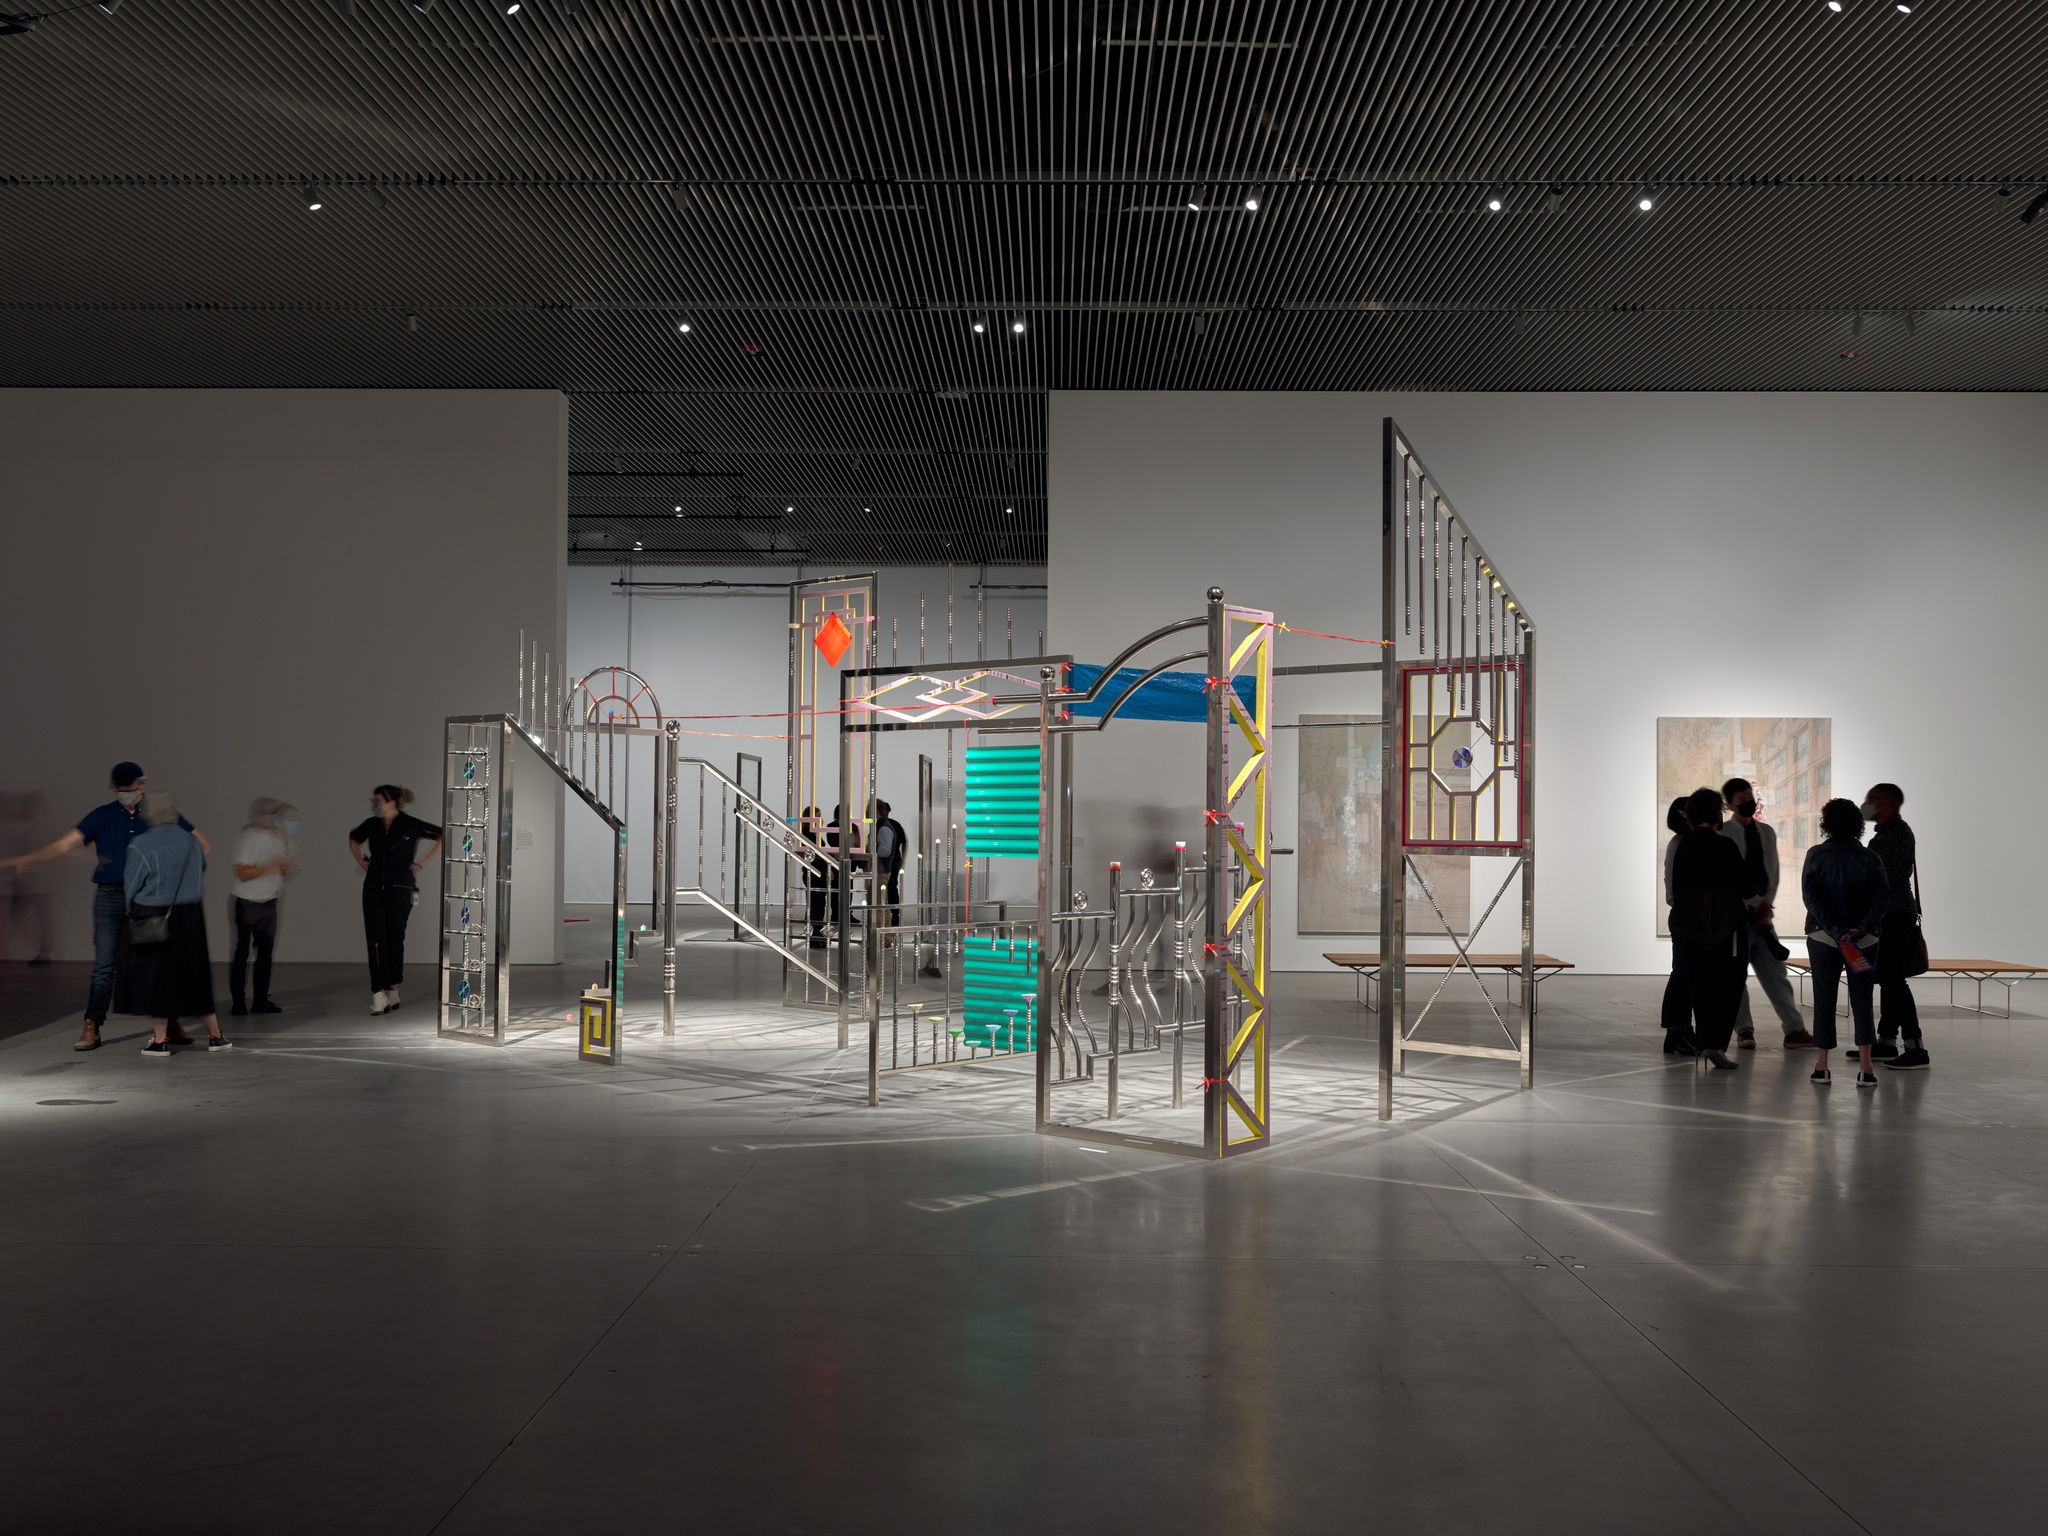 An art gallery with a large architectural installation of metal poles and railings in the middle of the room and people gathered to the side of it